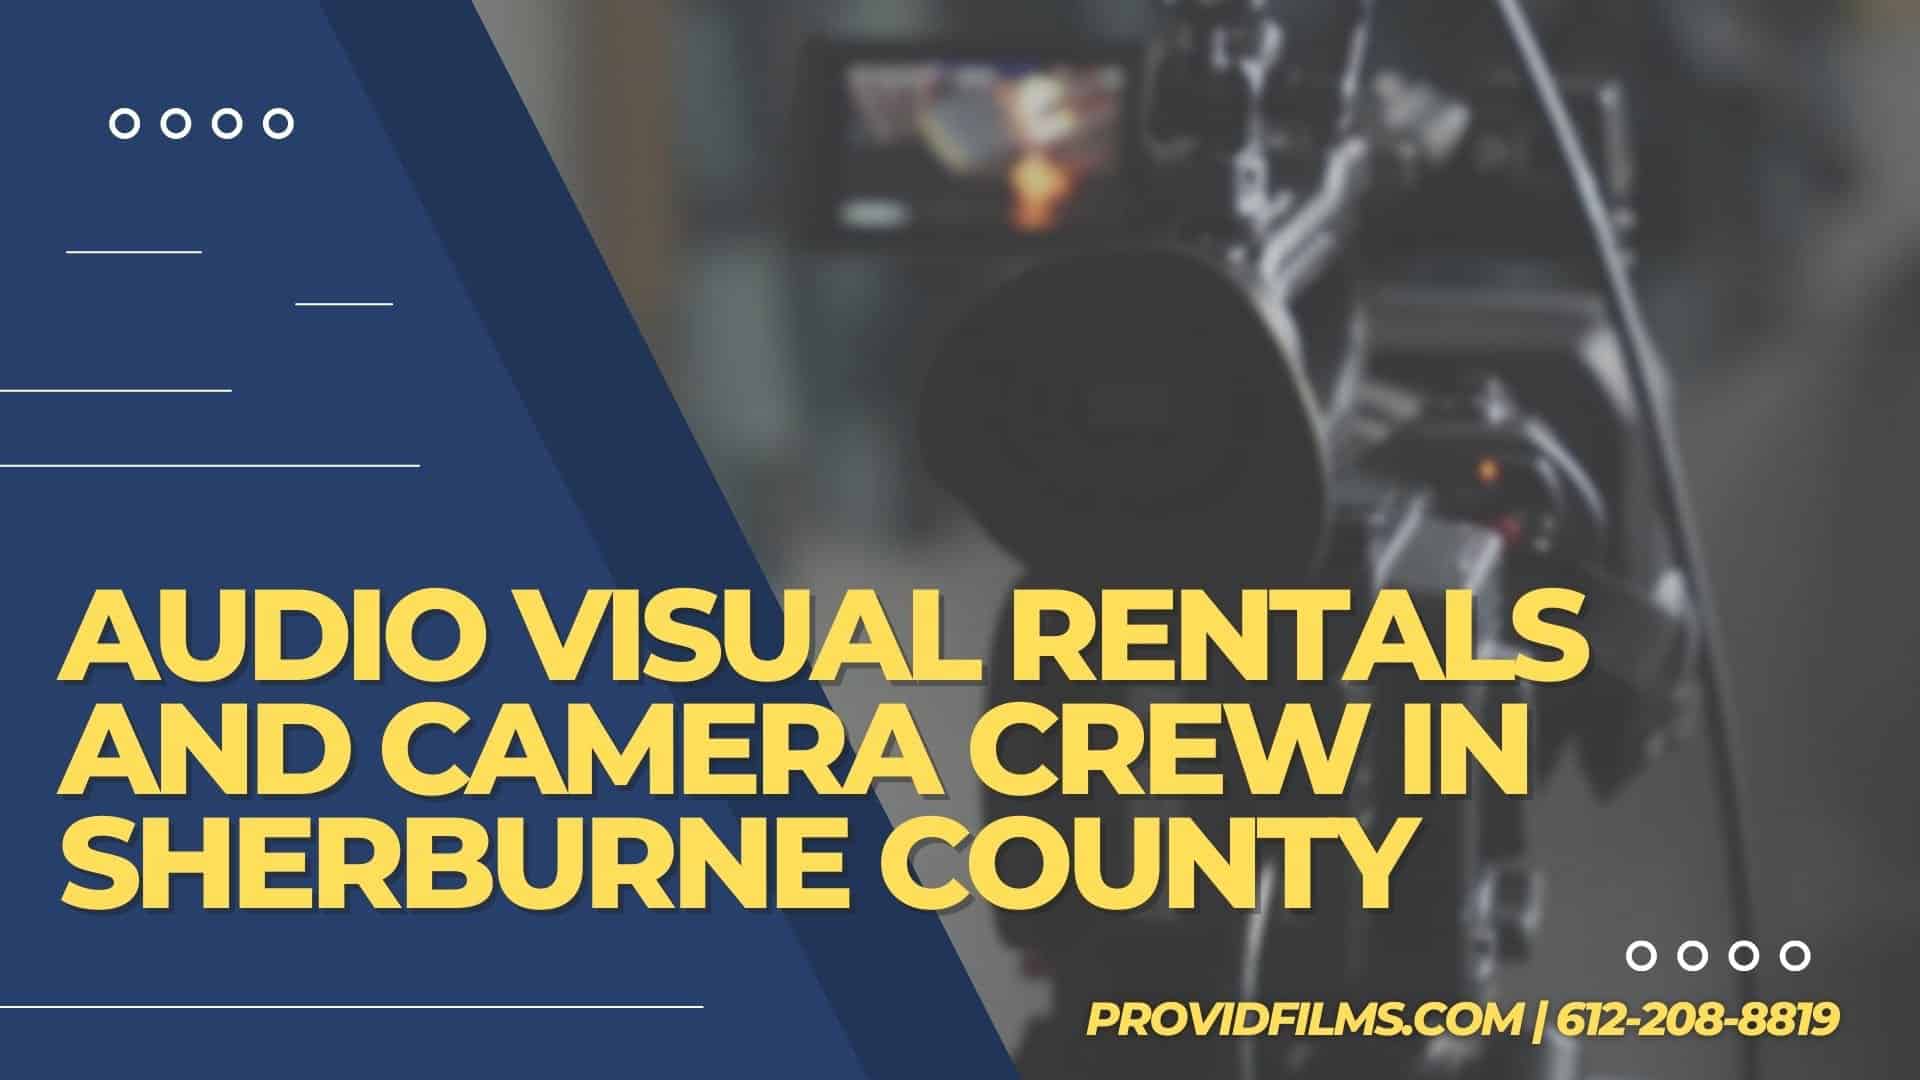 Graphic with a video camera crew with the text saying "AV Rental and Camera Crew in Sherburne County"